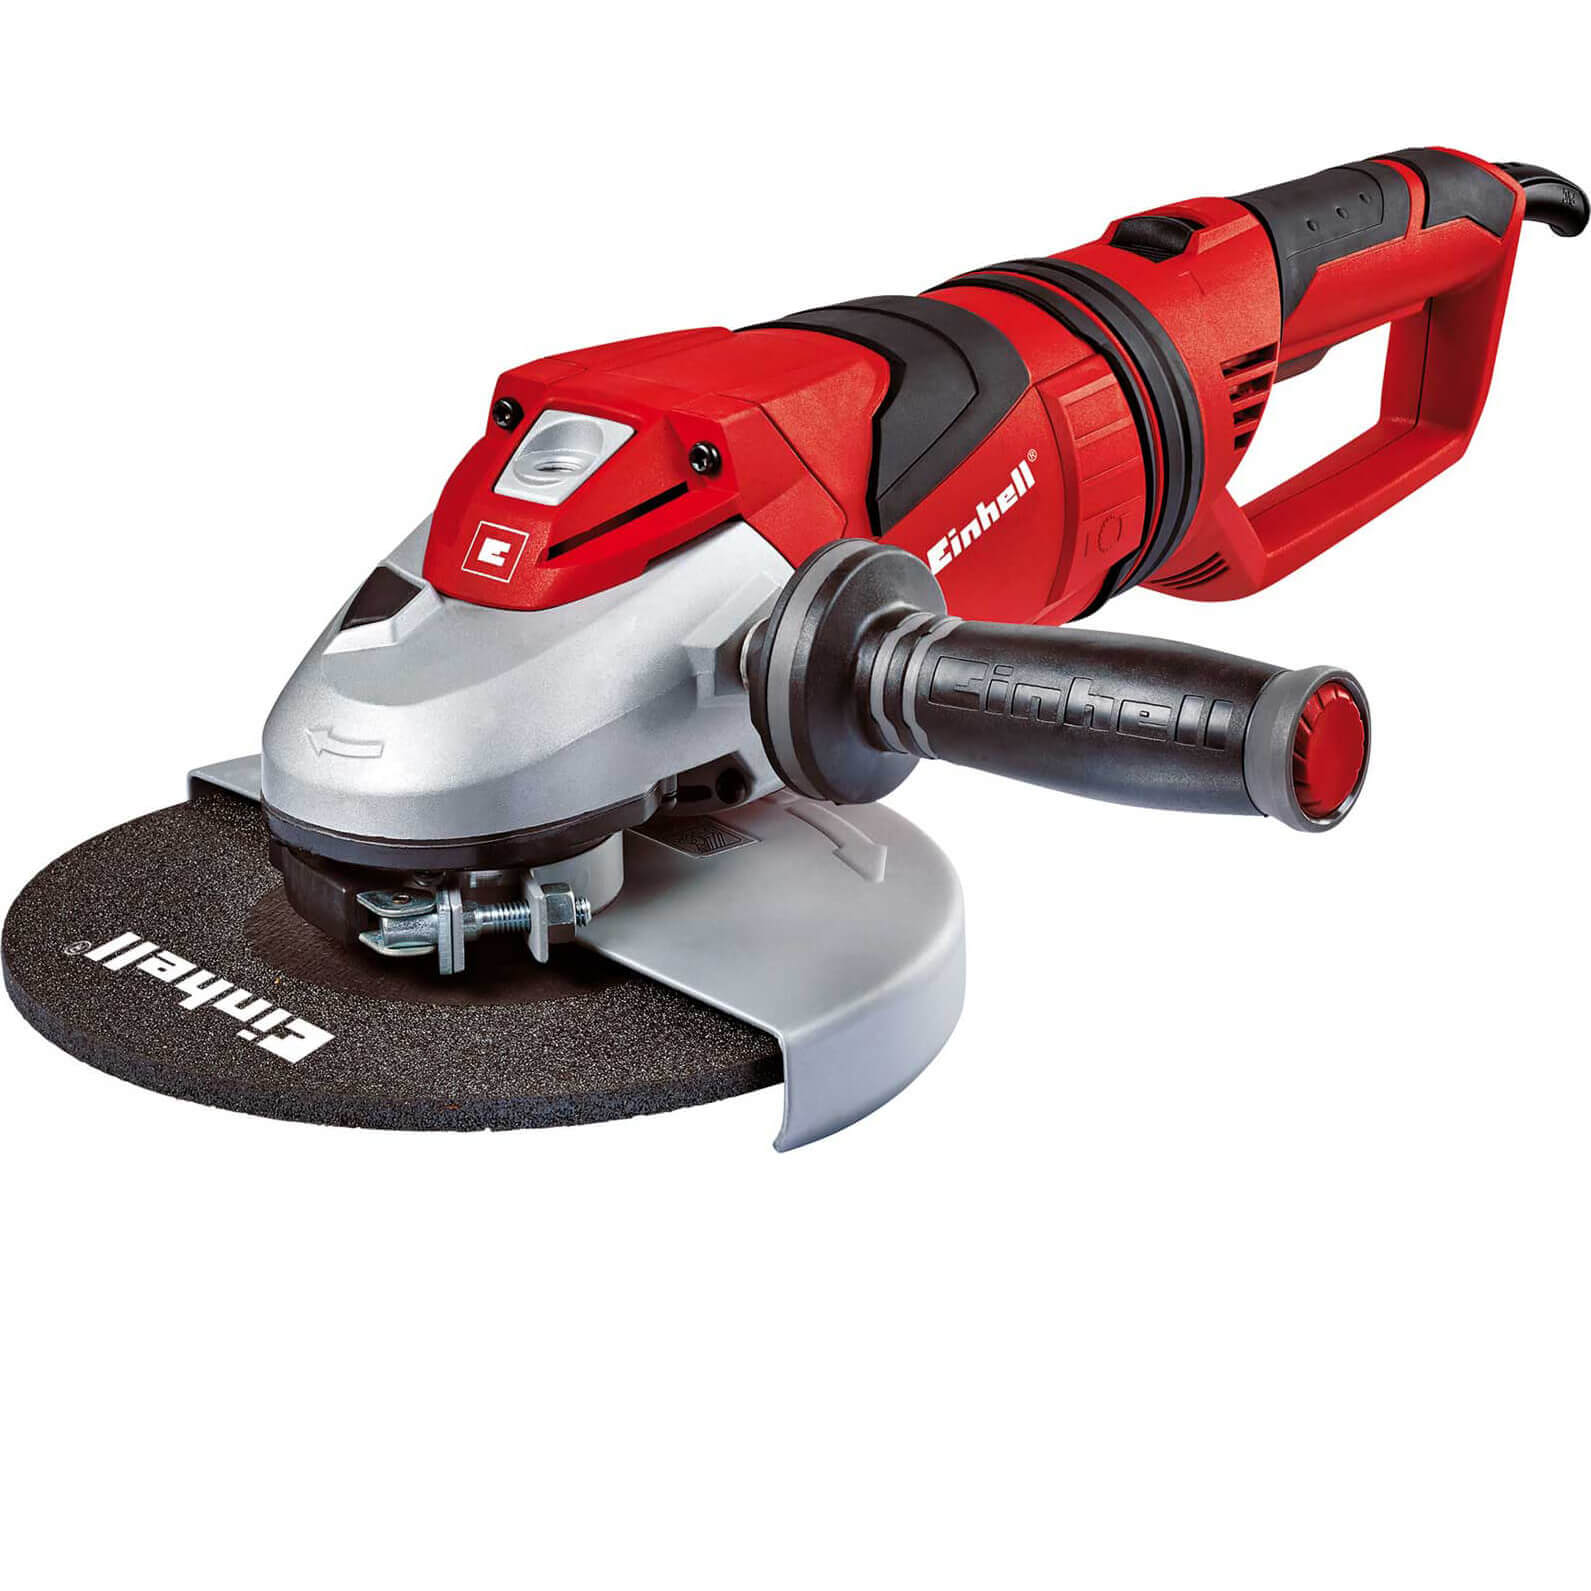 Image of Einhell TE-AG 230 Angle Grinder 230mm